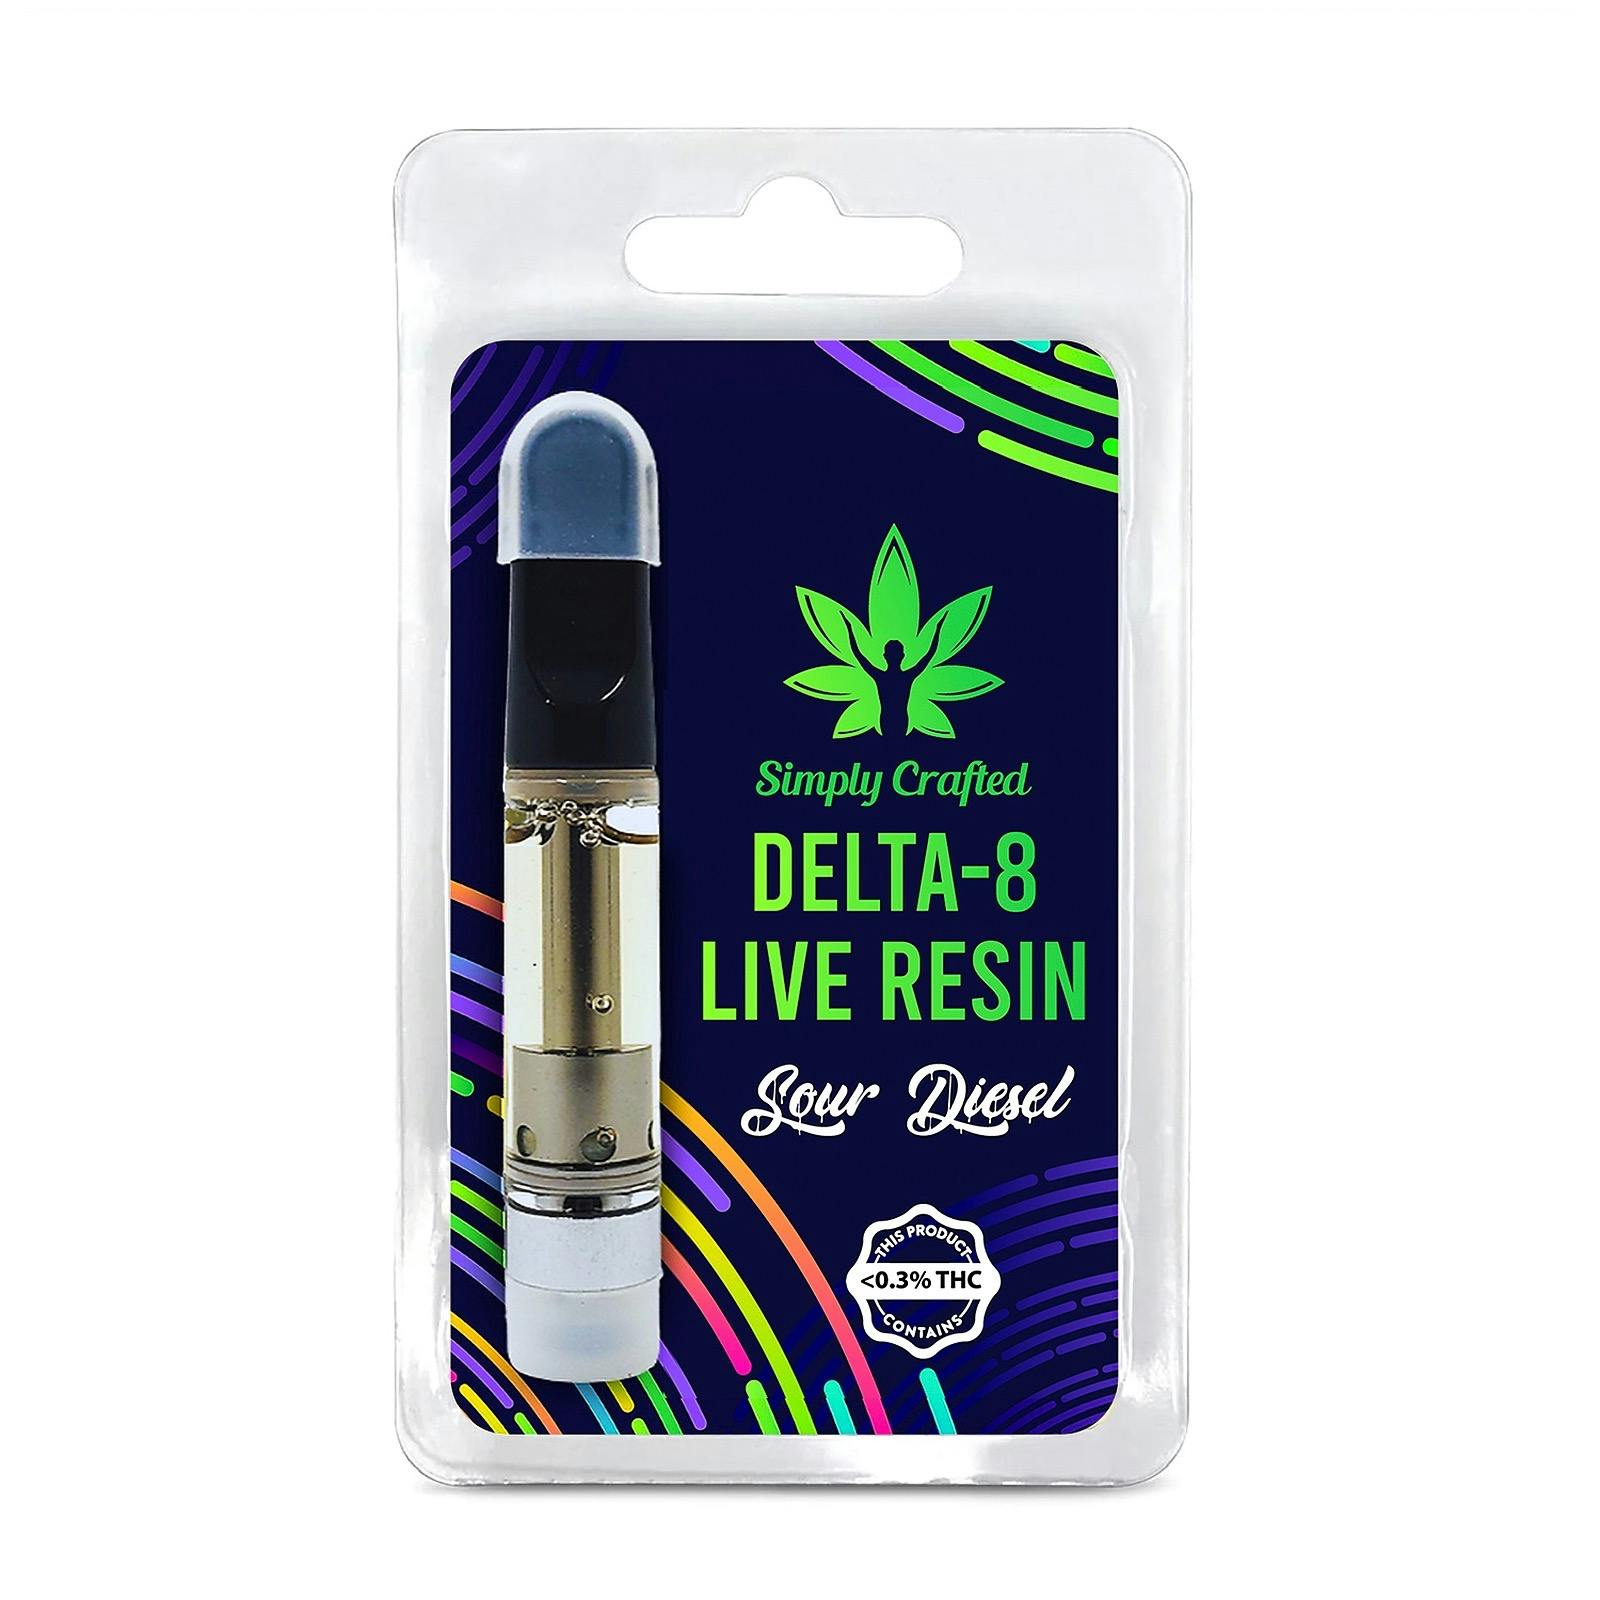 Simply Crafted Free Shipping Save 25 With Code Leafly Sour Diesel Live Resin Delta 8 Thc 1053